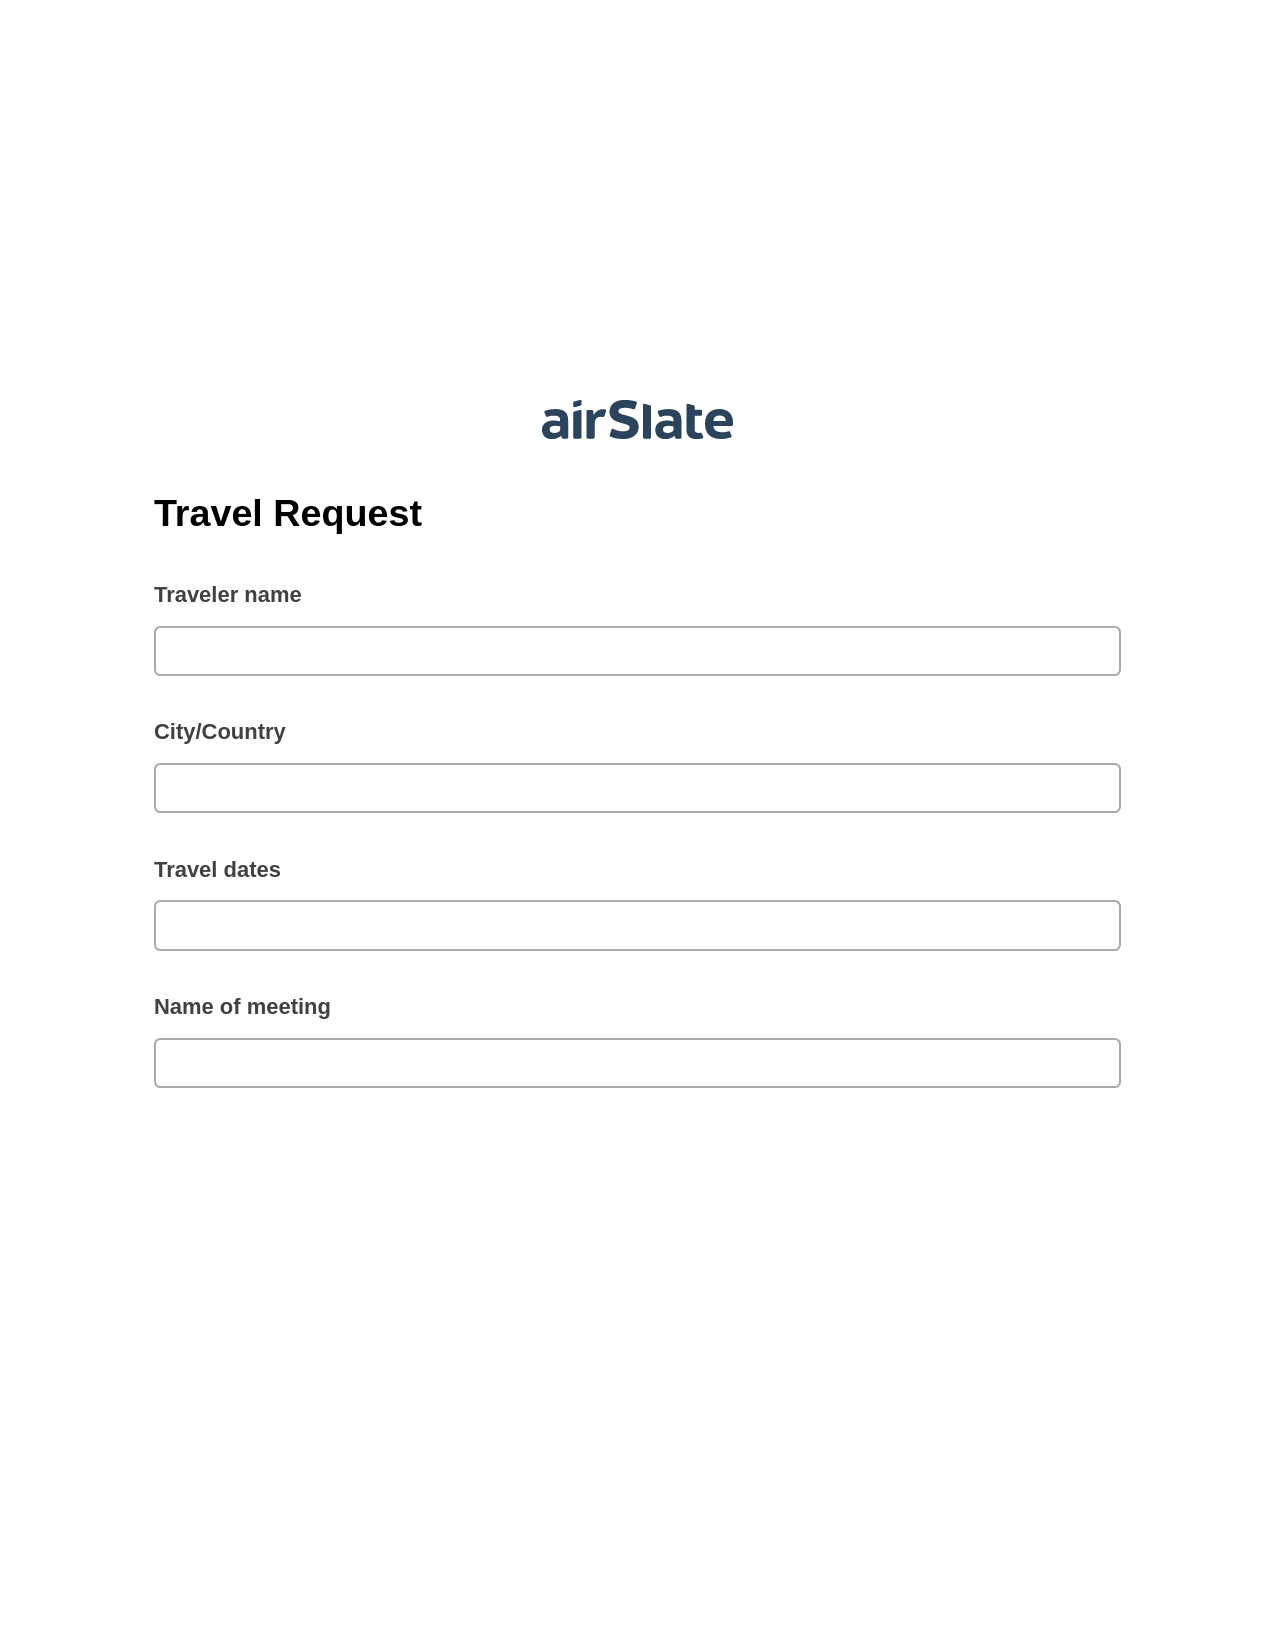 Travel Request Pre-fill Document Bot, Pre-fill with Custom Data Bot, Export to NetSuite Record Bot